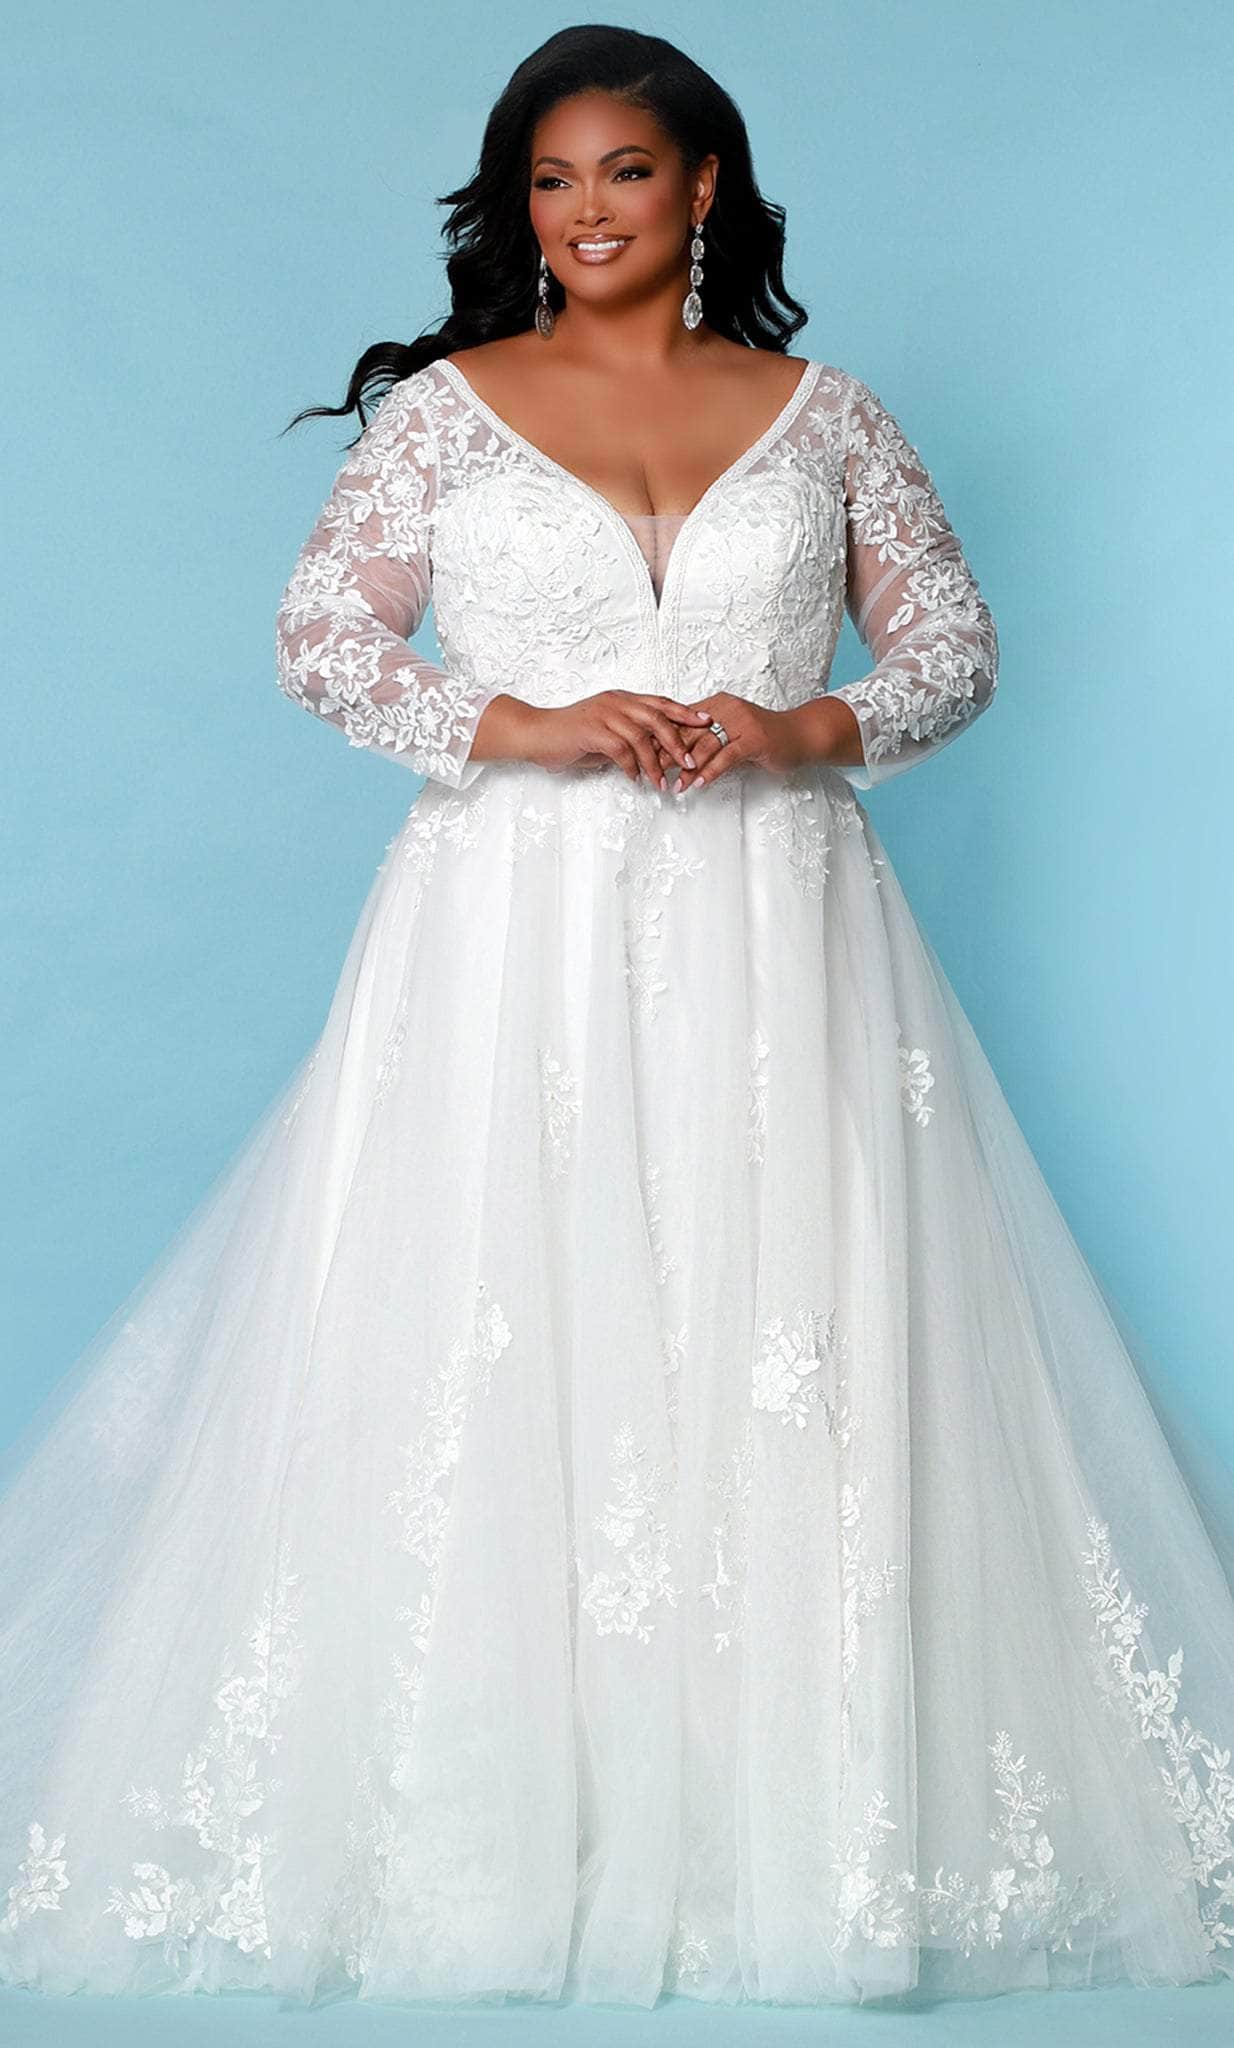 Image of Sydney's Closet Bridal SC5275 - Long Sleeve A-line Tulle Gown